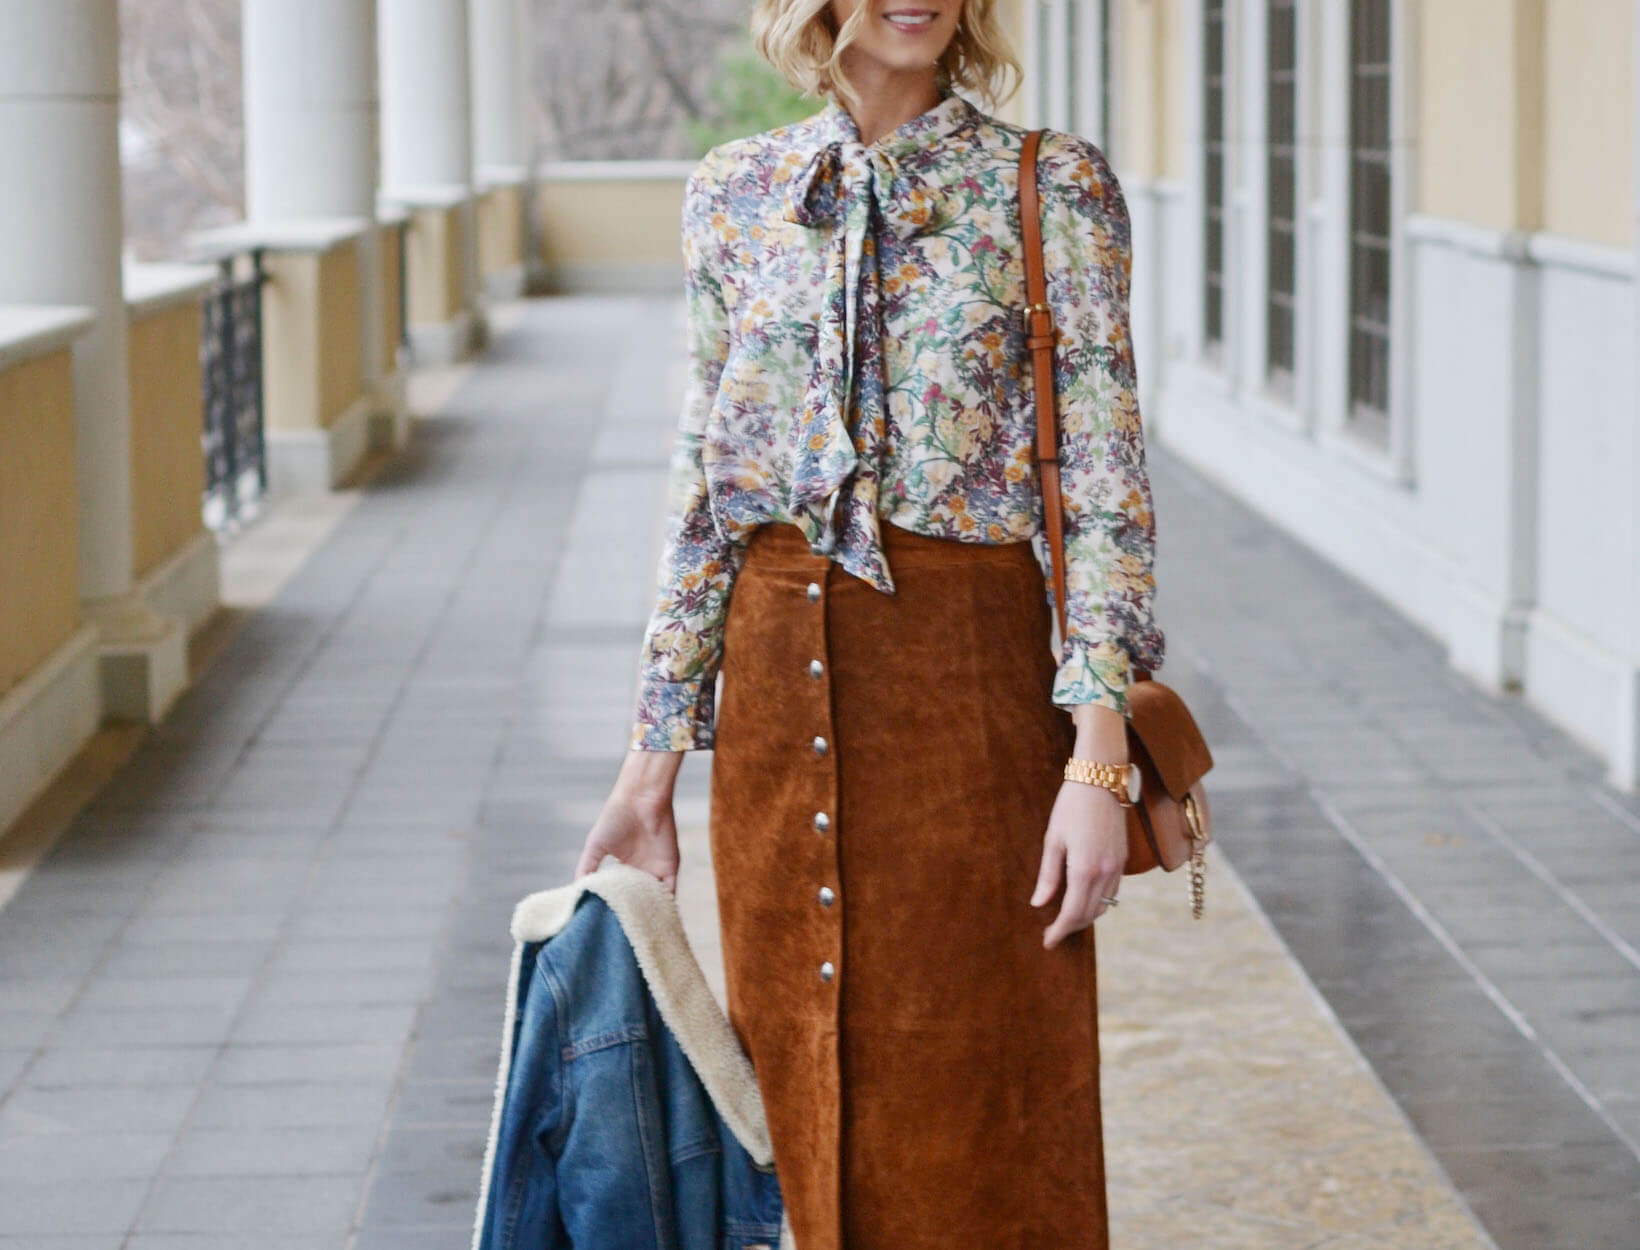 The Style Update: '70s Elements